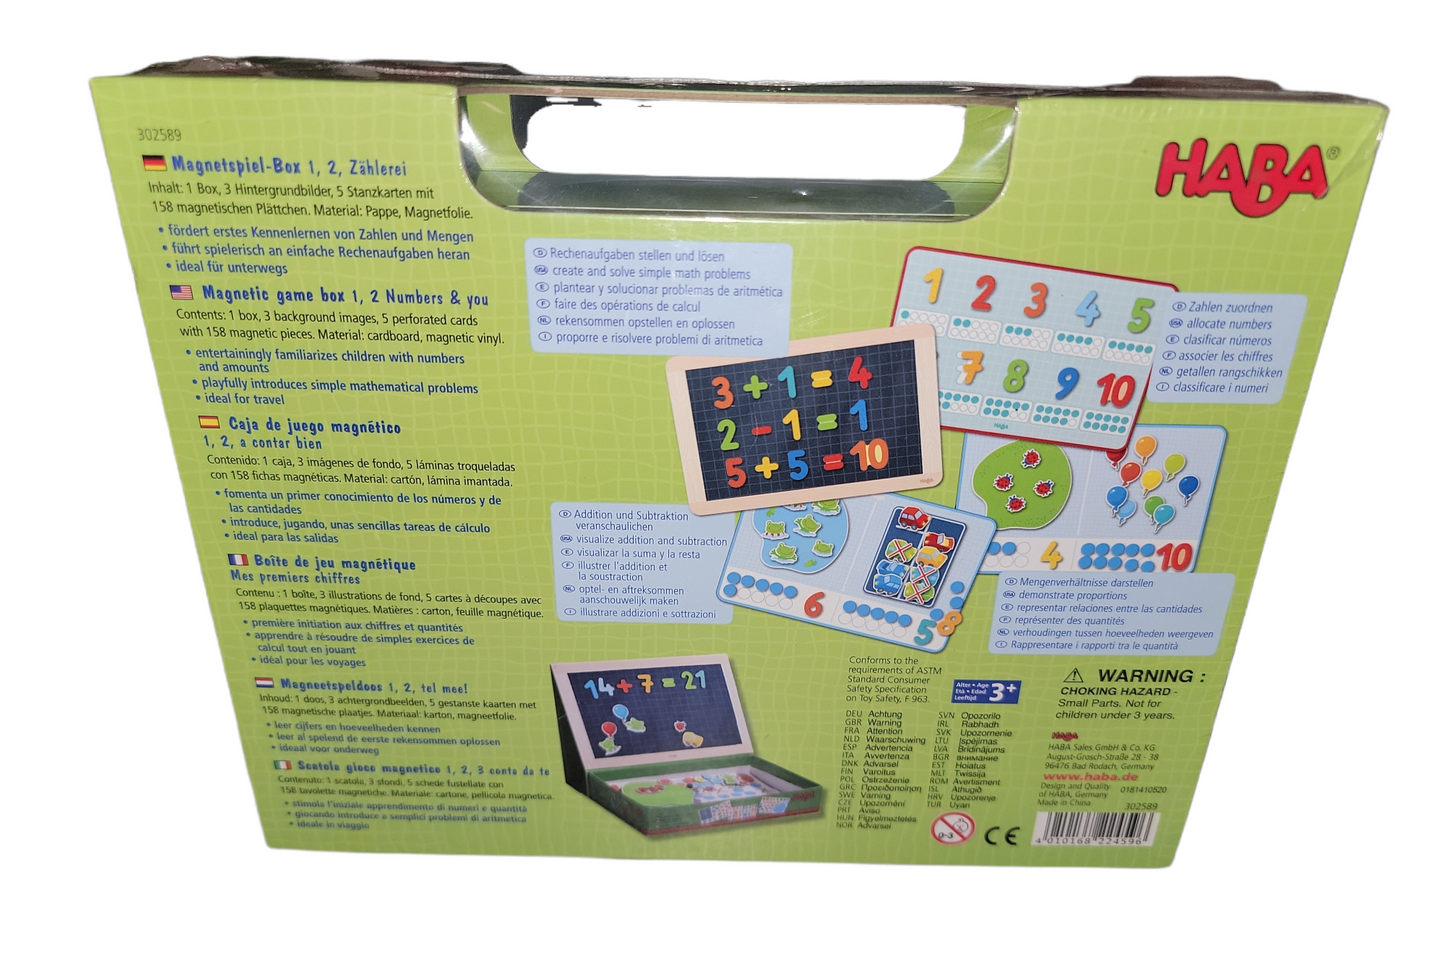 Magnetic Game Box